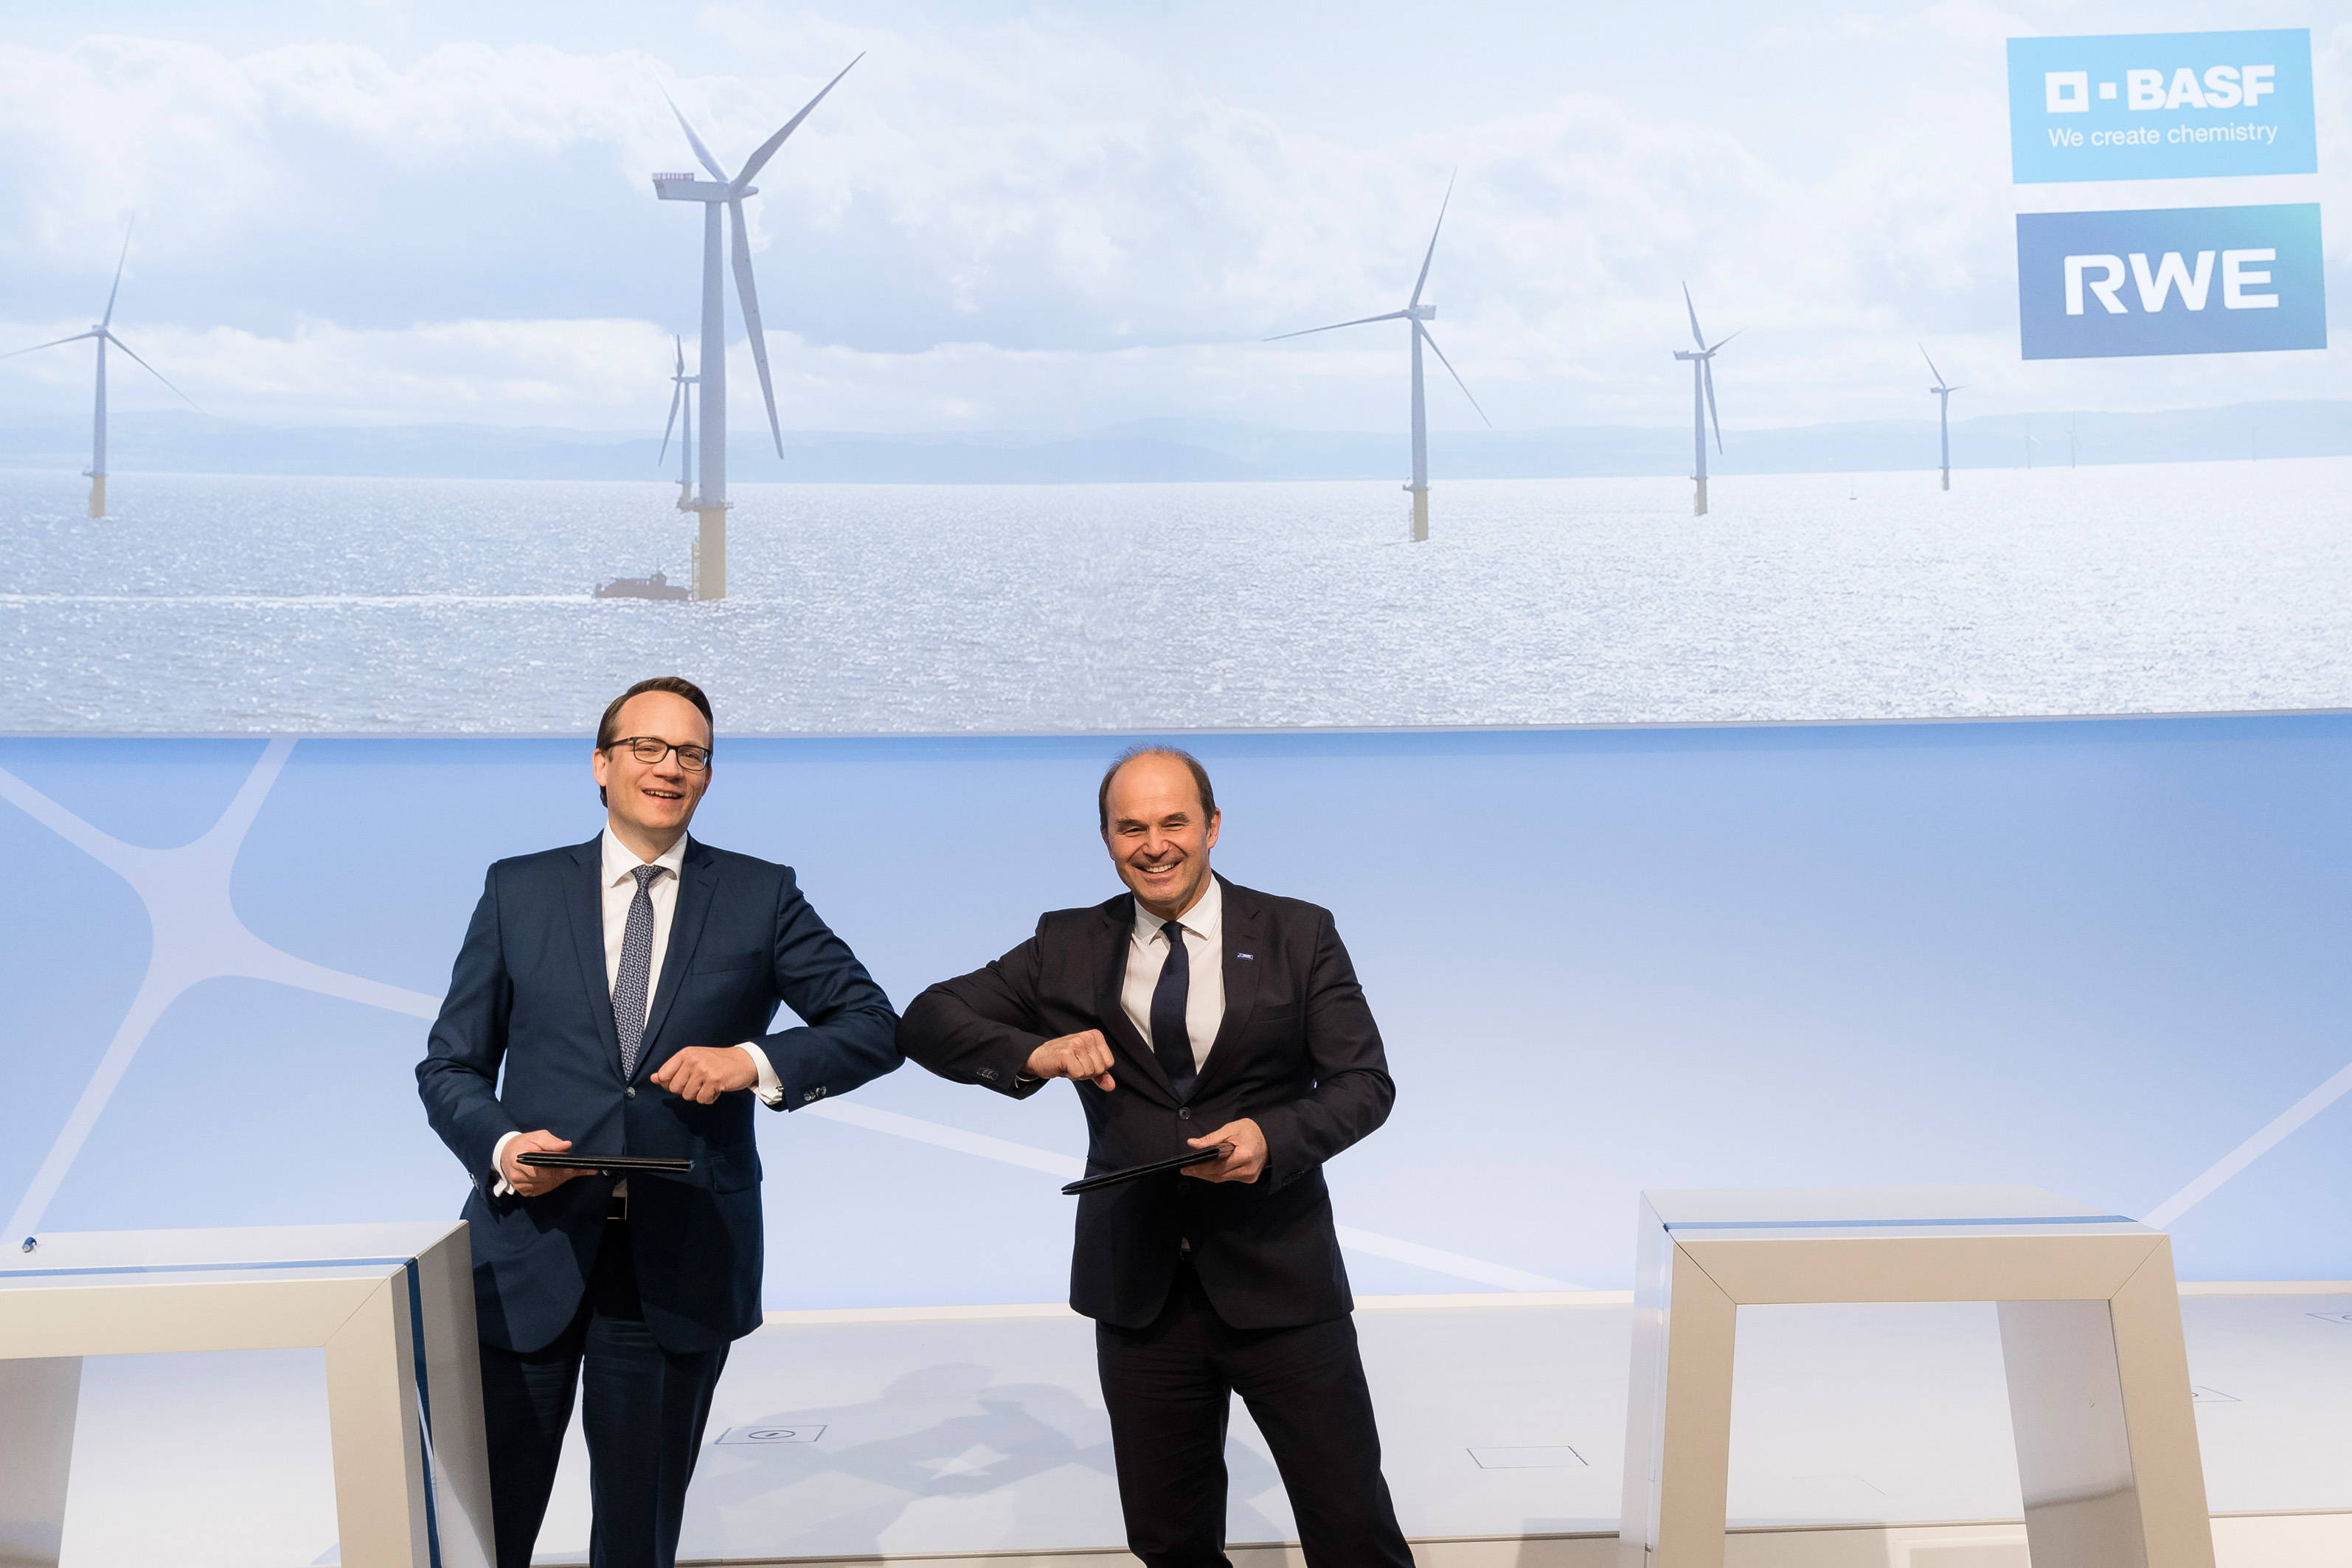 CEOs of RWE and BASF, Dr Markus Krebber and Dr Martin Brudermüller, sign a letter of intent to develop renewable electricity.